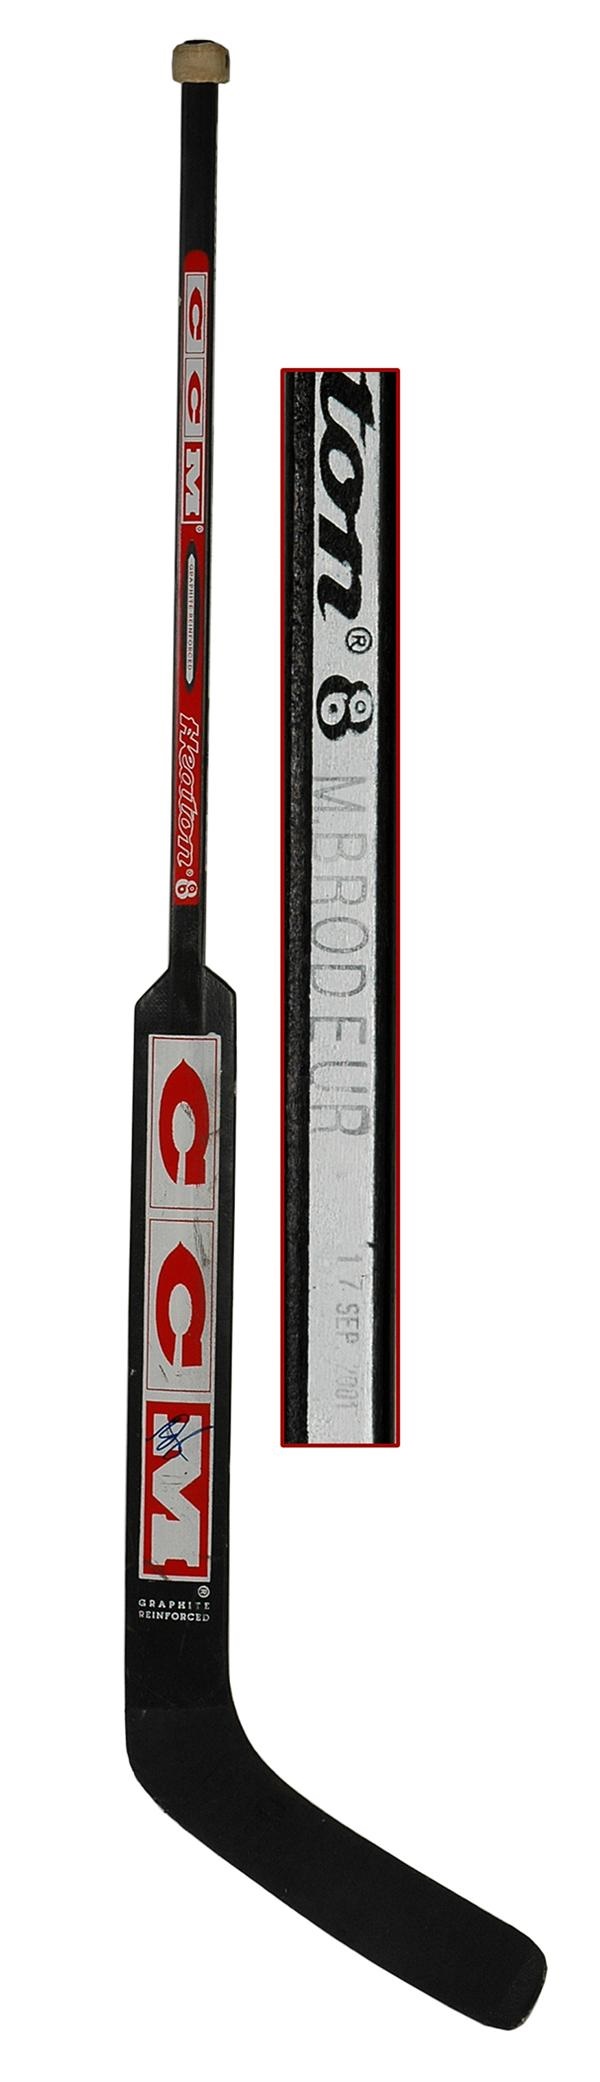 - 2001 Martin Brodeur Autographed Game Used Stick